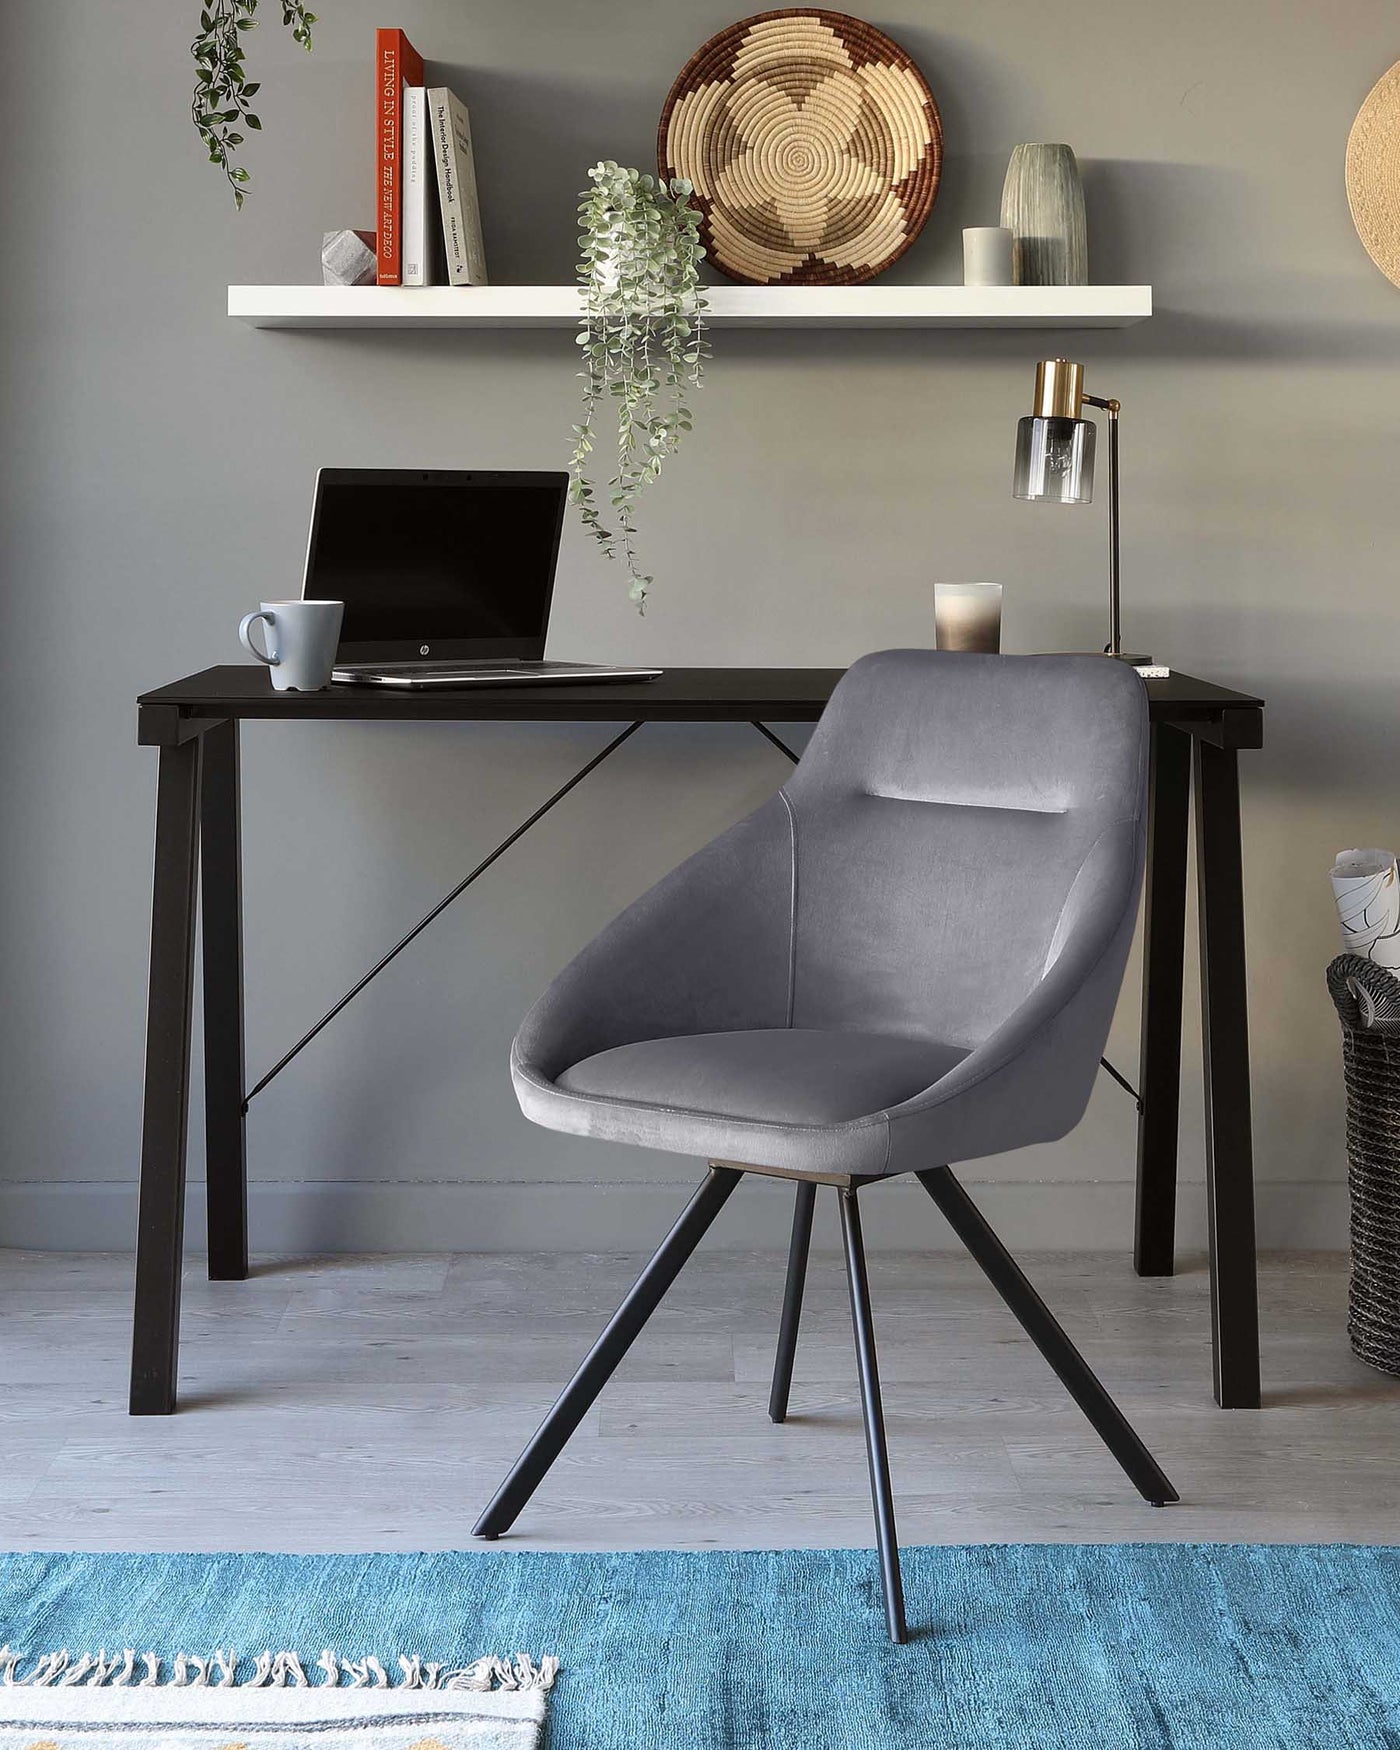 A modern home office setup featuring a sleek, black wooden desk with a subtly angled design and slender legs paired with a contemporary grey upholstered chair with a curved backrest and black metal base. The desk is accessorized with a laptop, a white mug, and a stylish desk lamp with a glass shade.